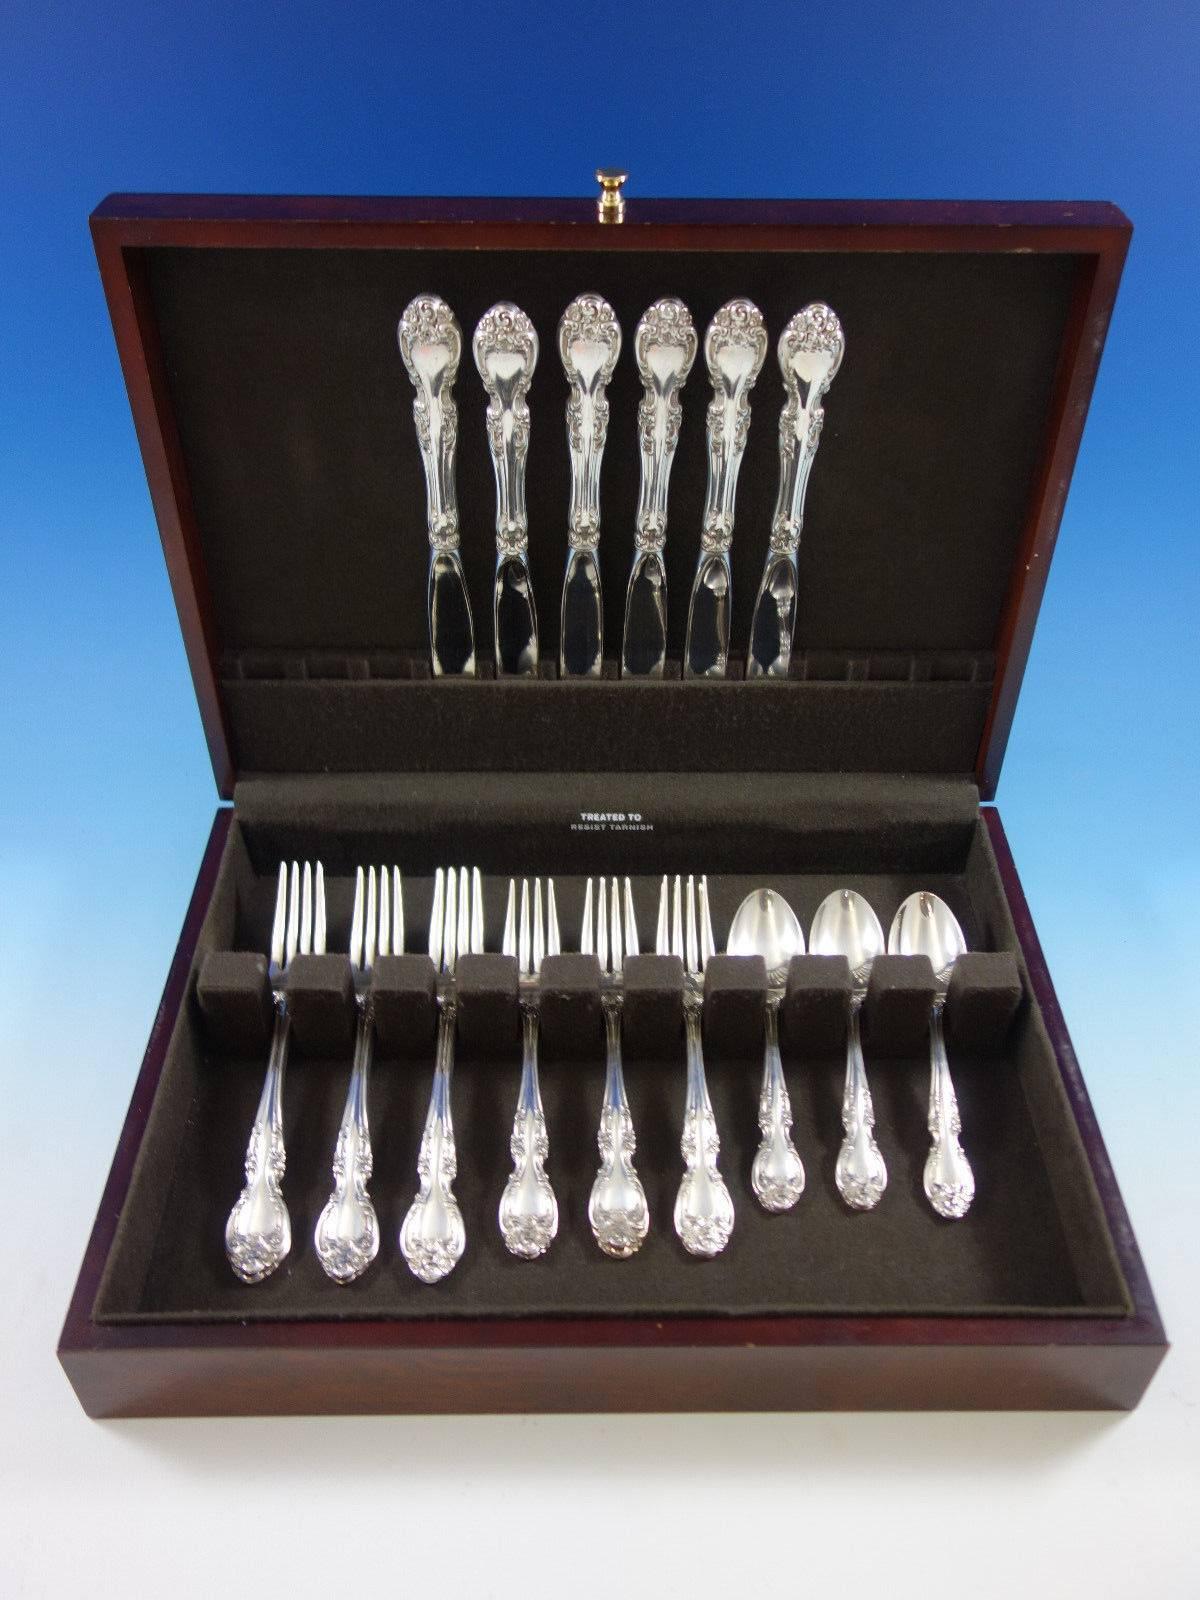 Melrose by Gorham place size sterling silver flatware set - 24 pieces. Great starter set! This set includes: 

Six place size knives, 9 1/8